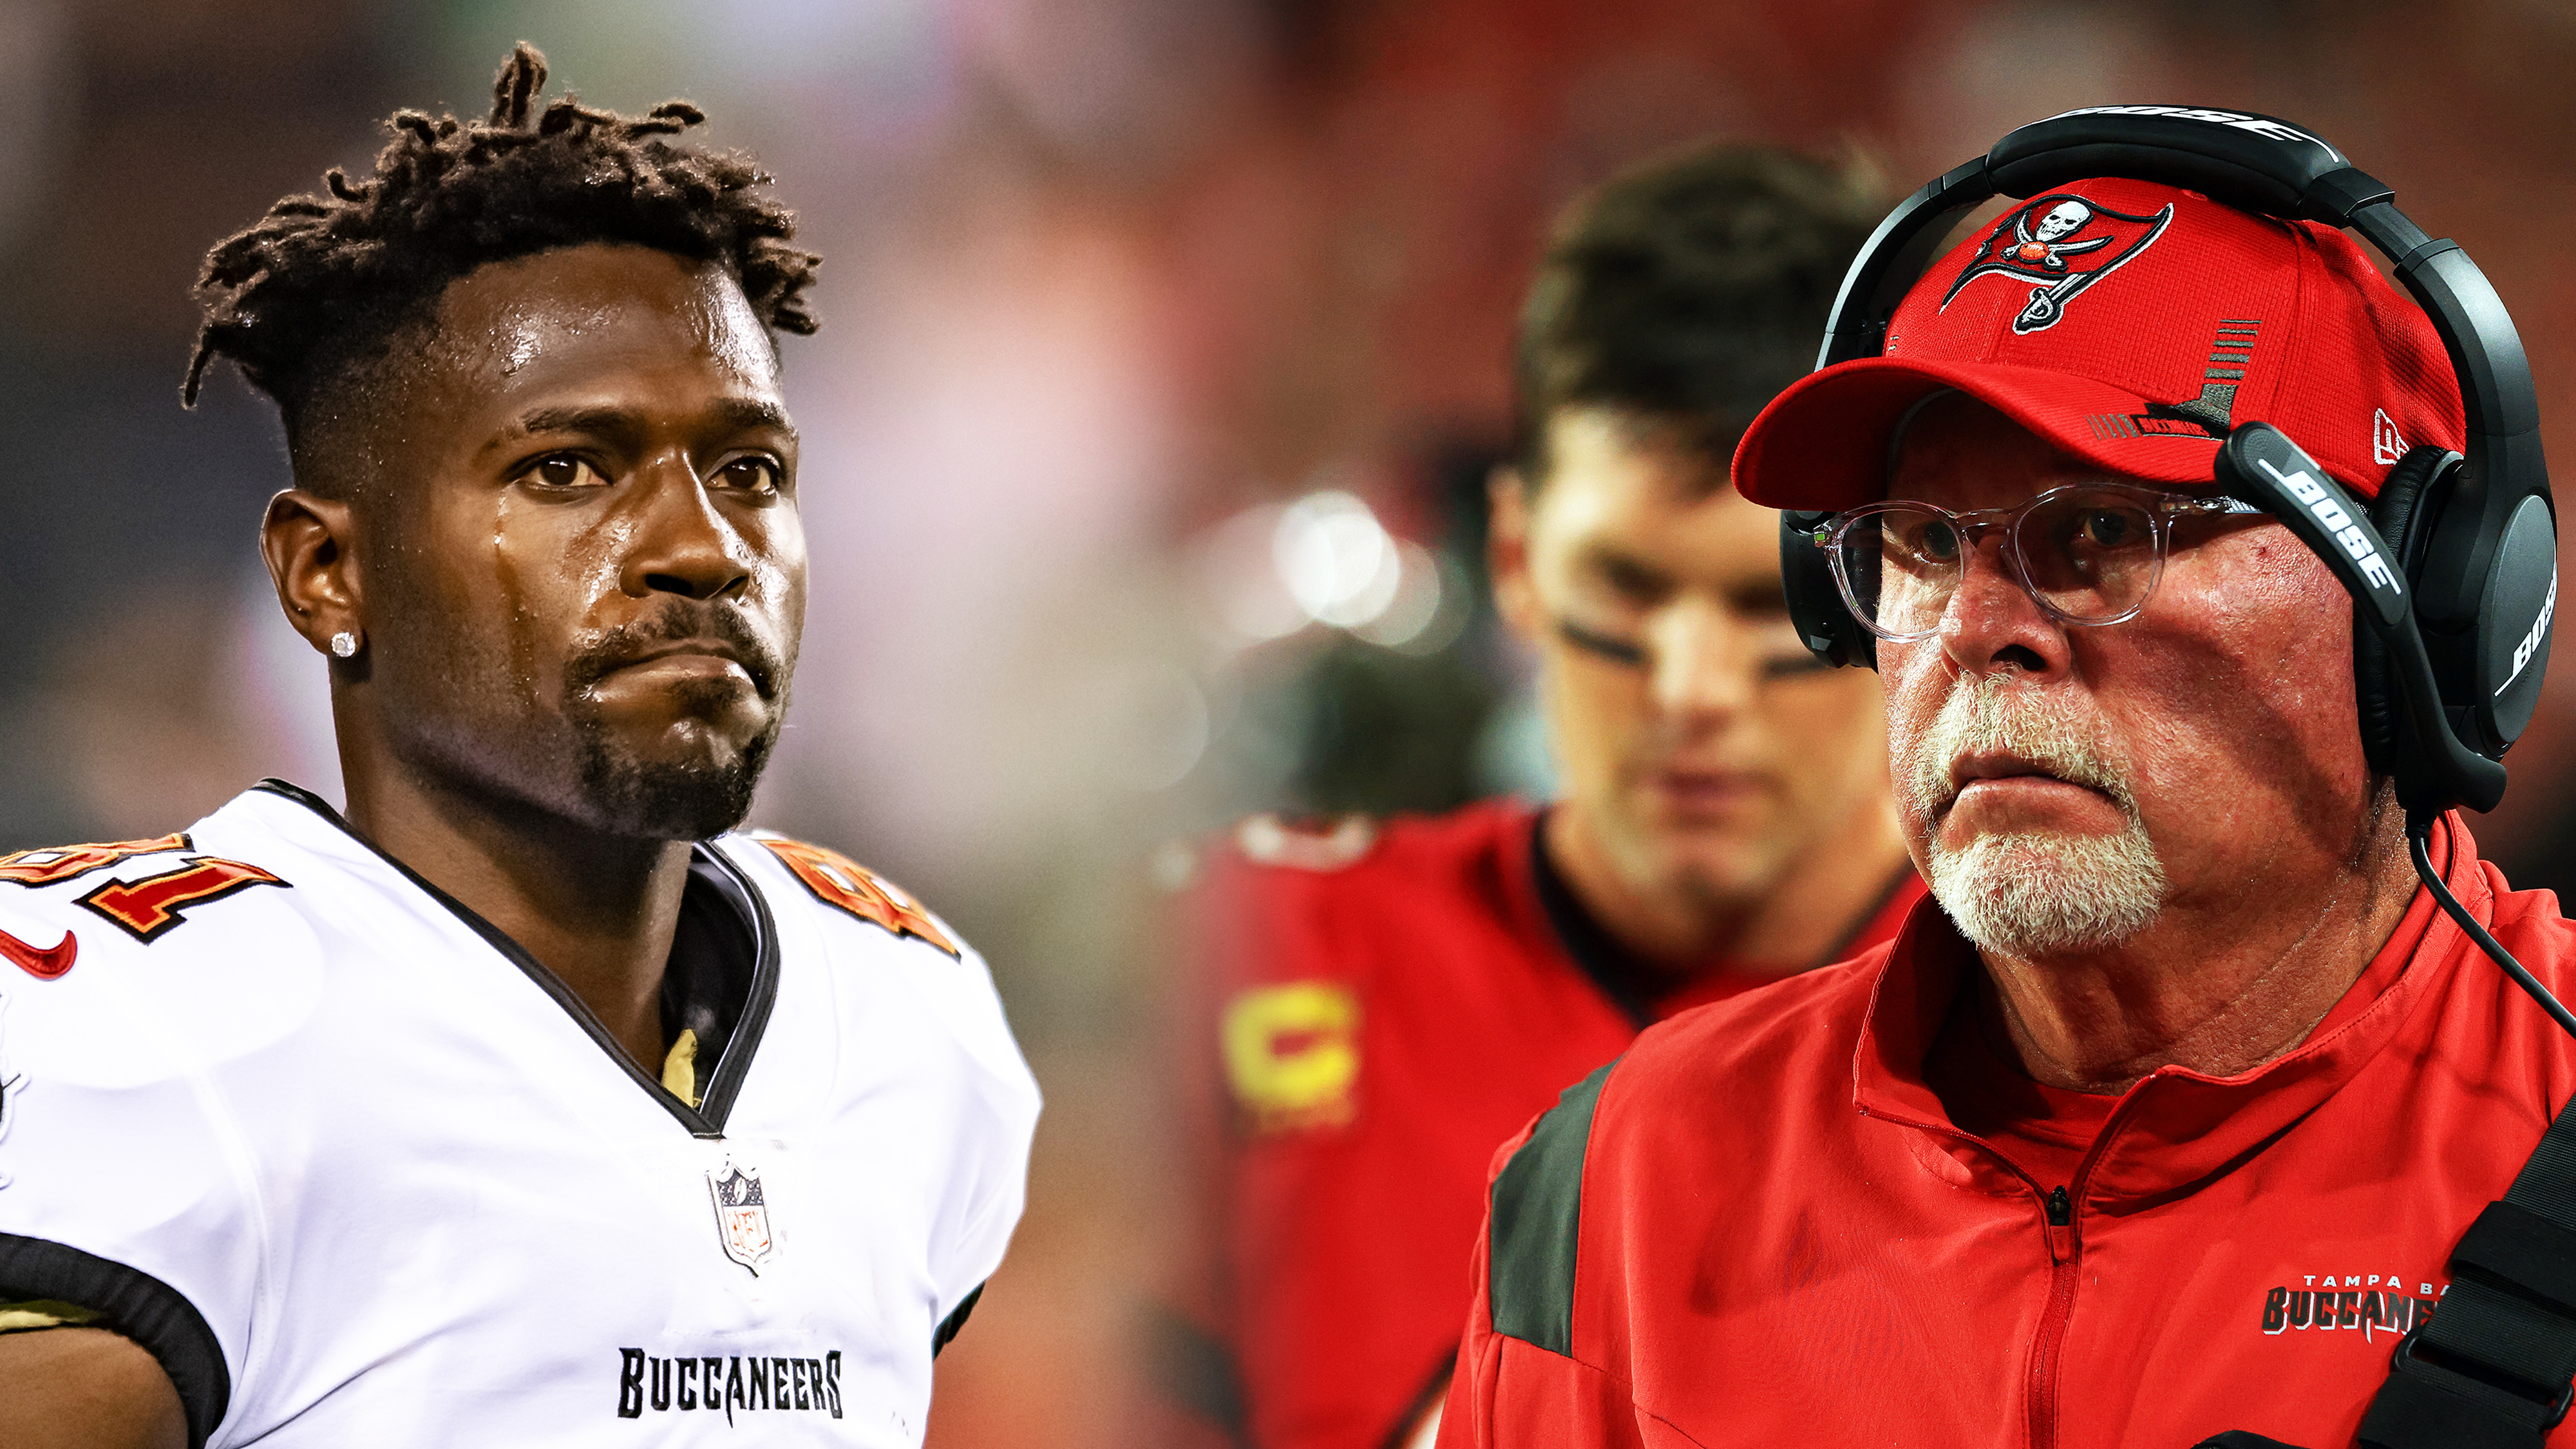 Hurley’s Picks: Bruce Arians, Antonio Brown, And The Reality Of Elastic Principles In Pursuit Of A Super Bowl